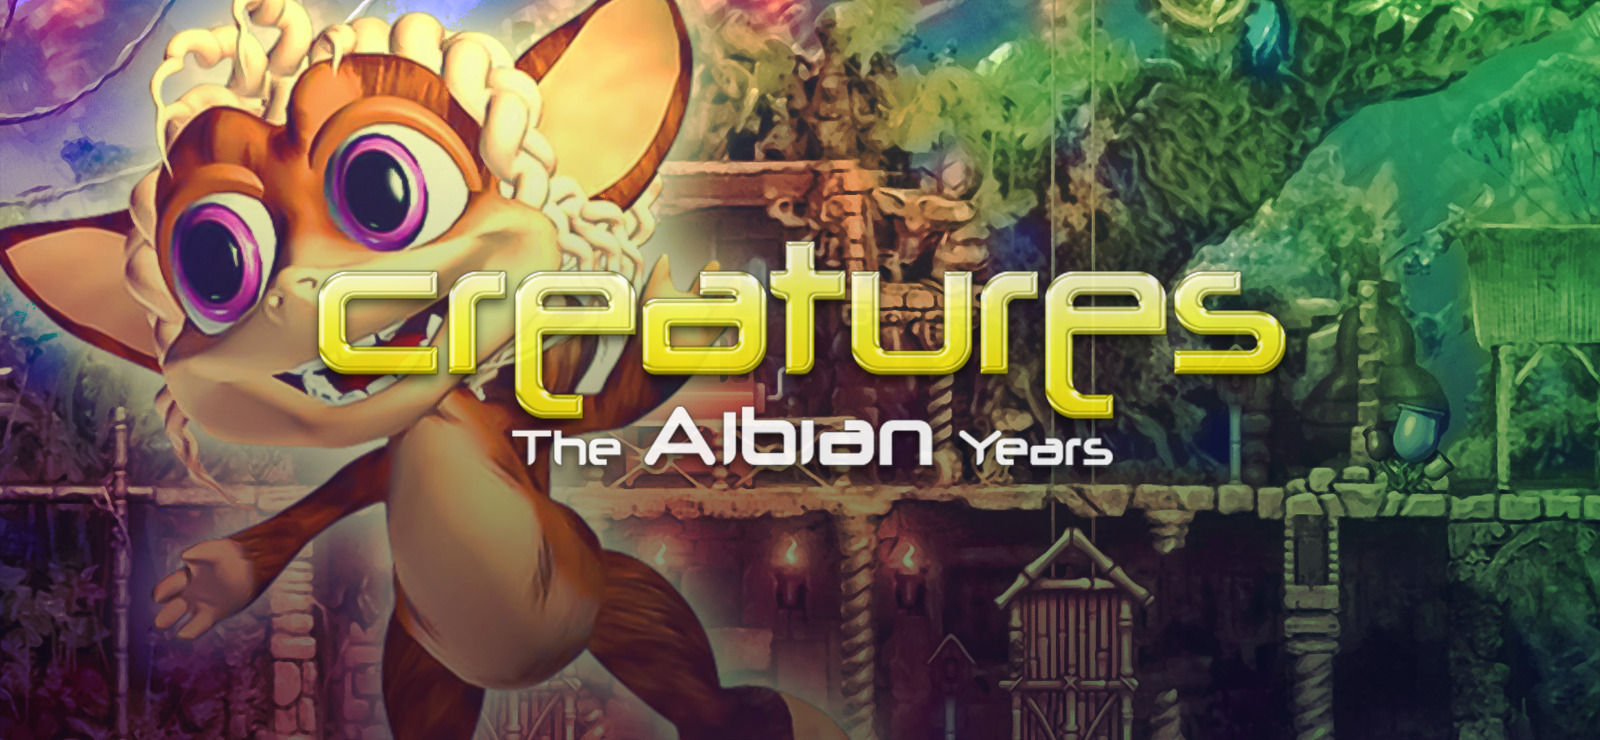 Creatures: The Albian Years on 